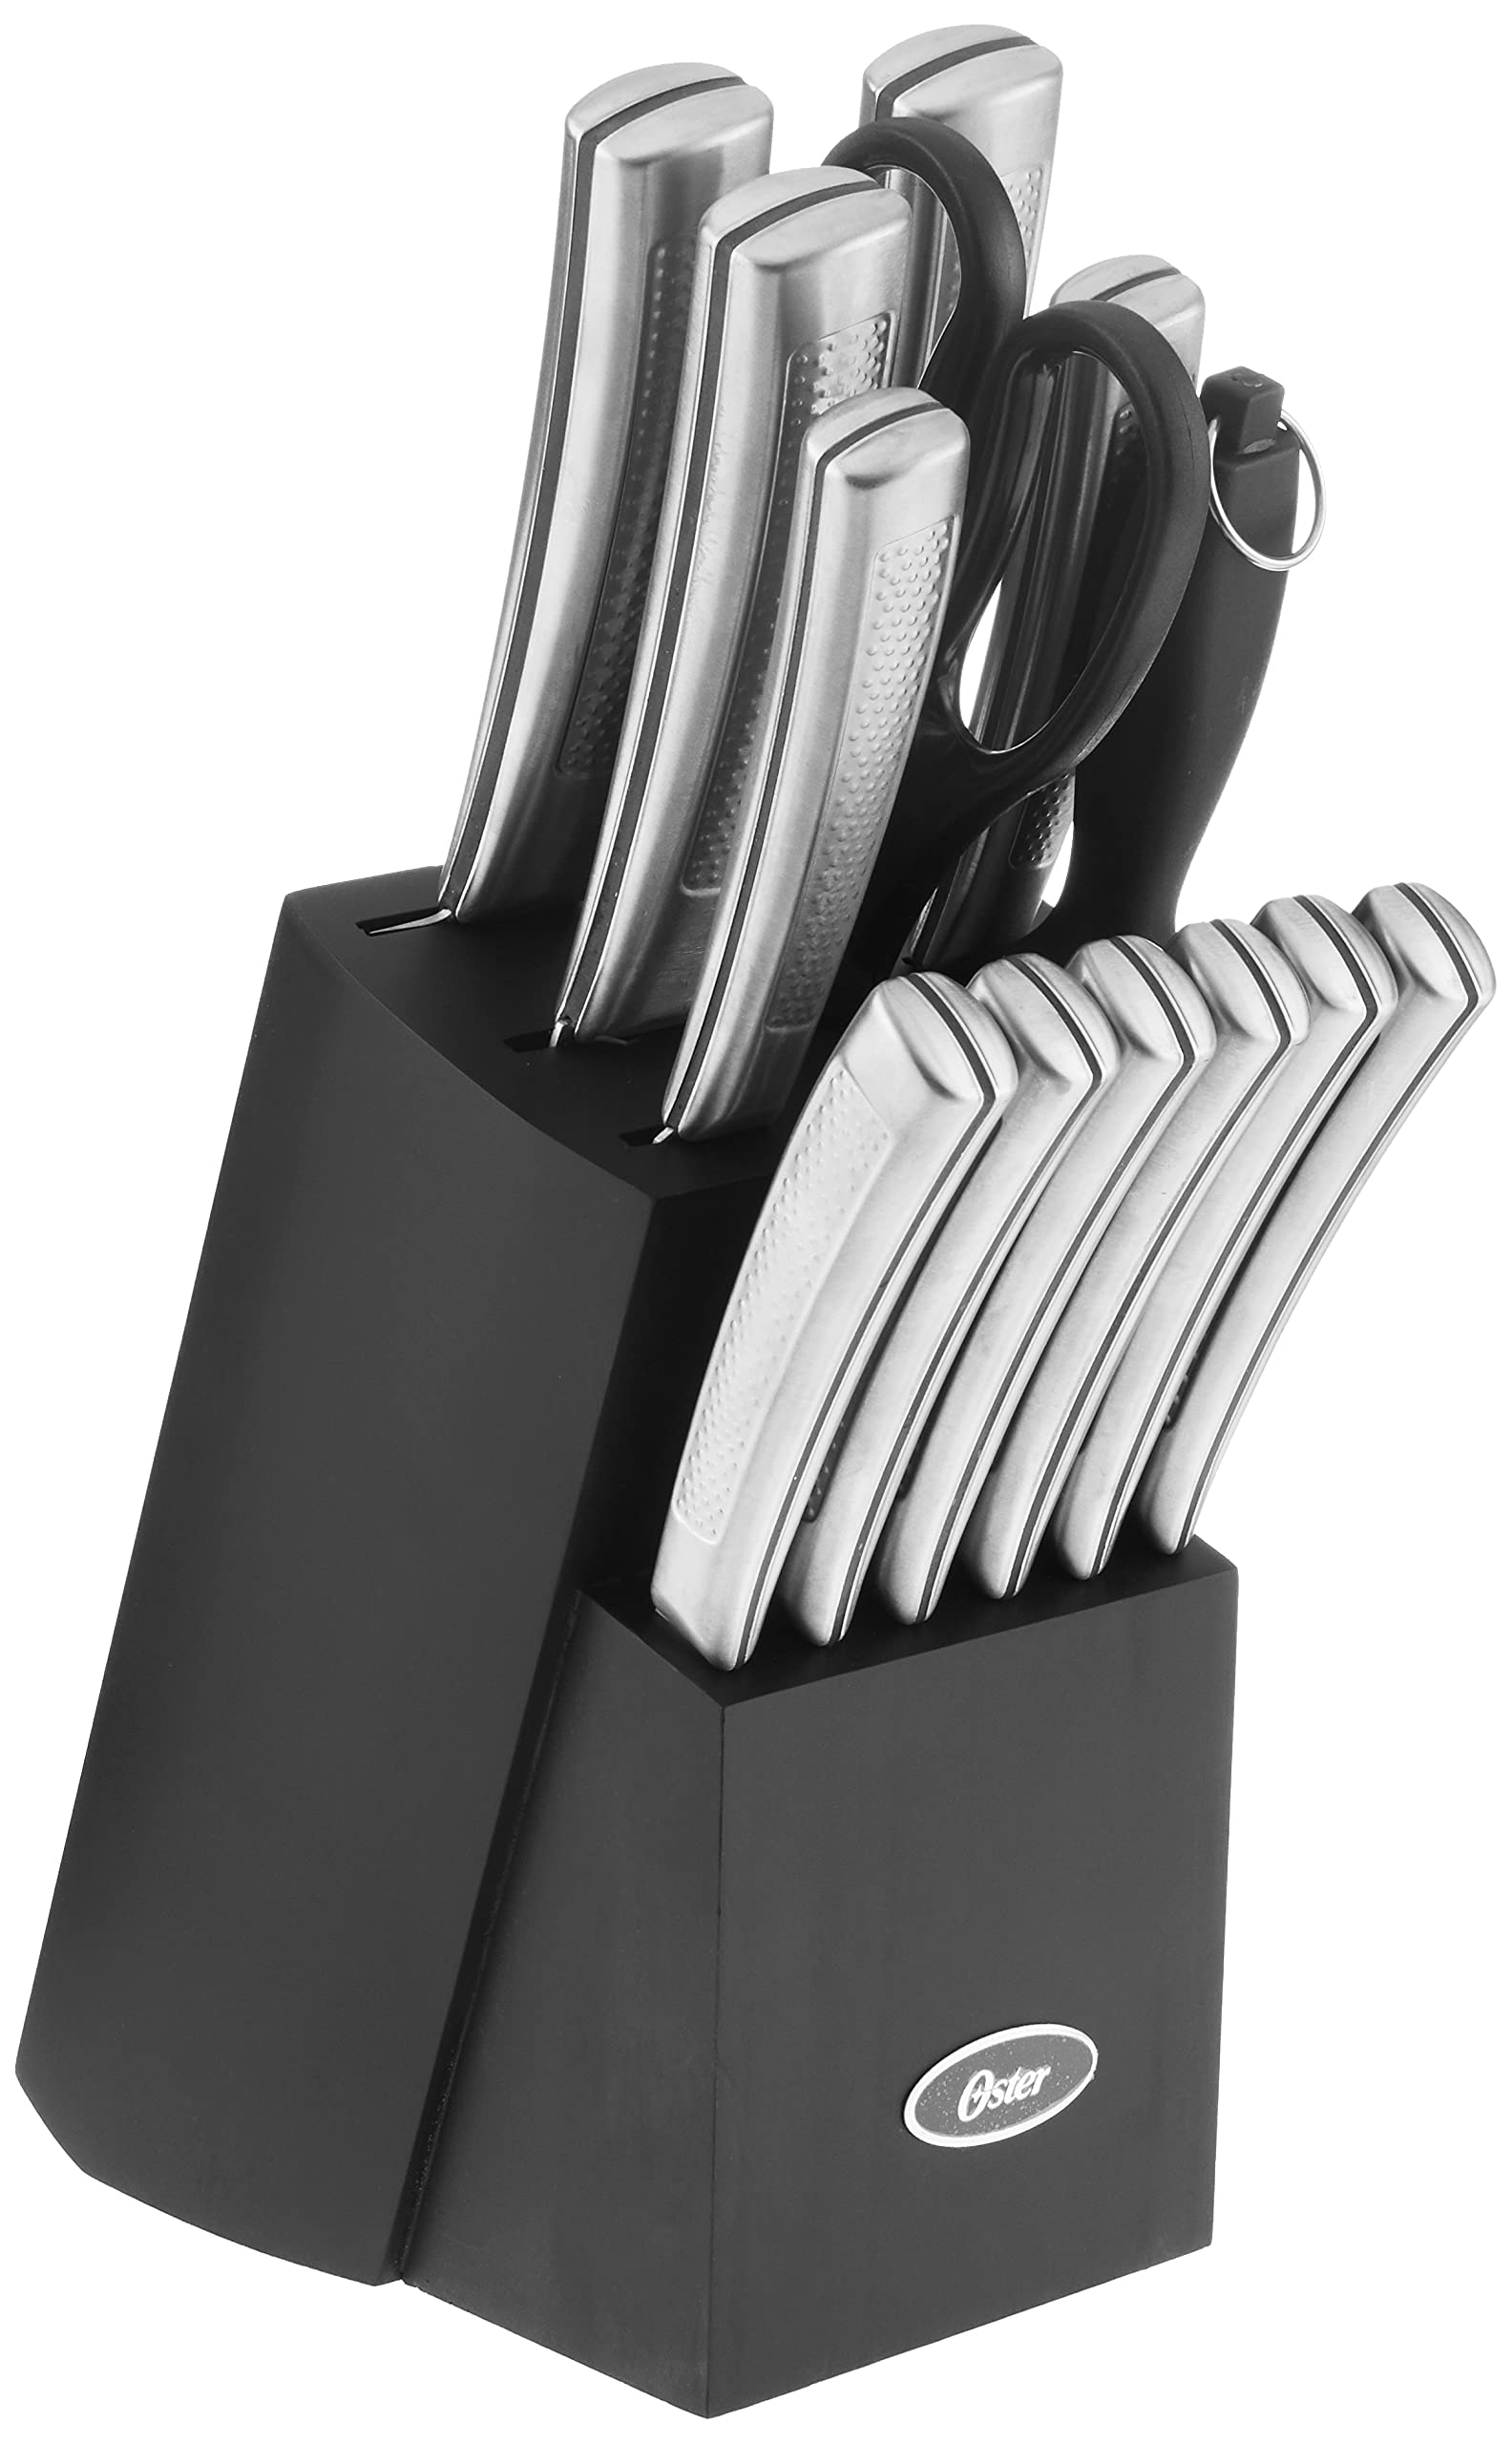 Oster Wellisford High-Carbon Stainless Steel Cutlery Set, 14-Piece, Black/Silver